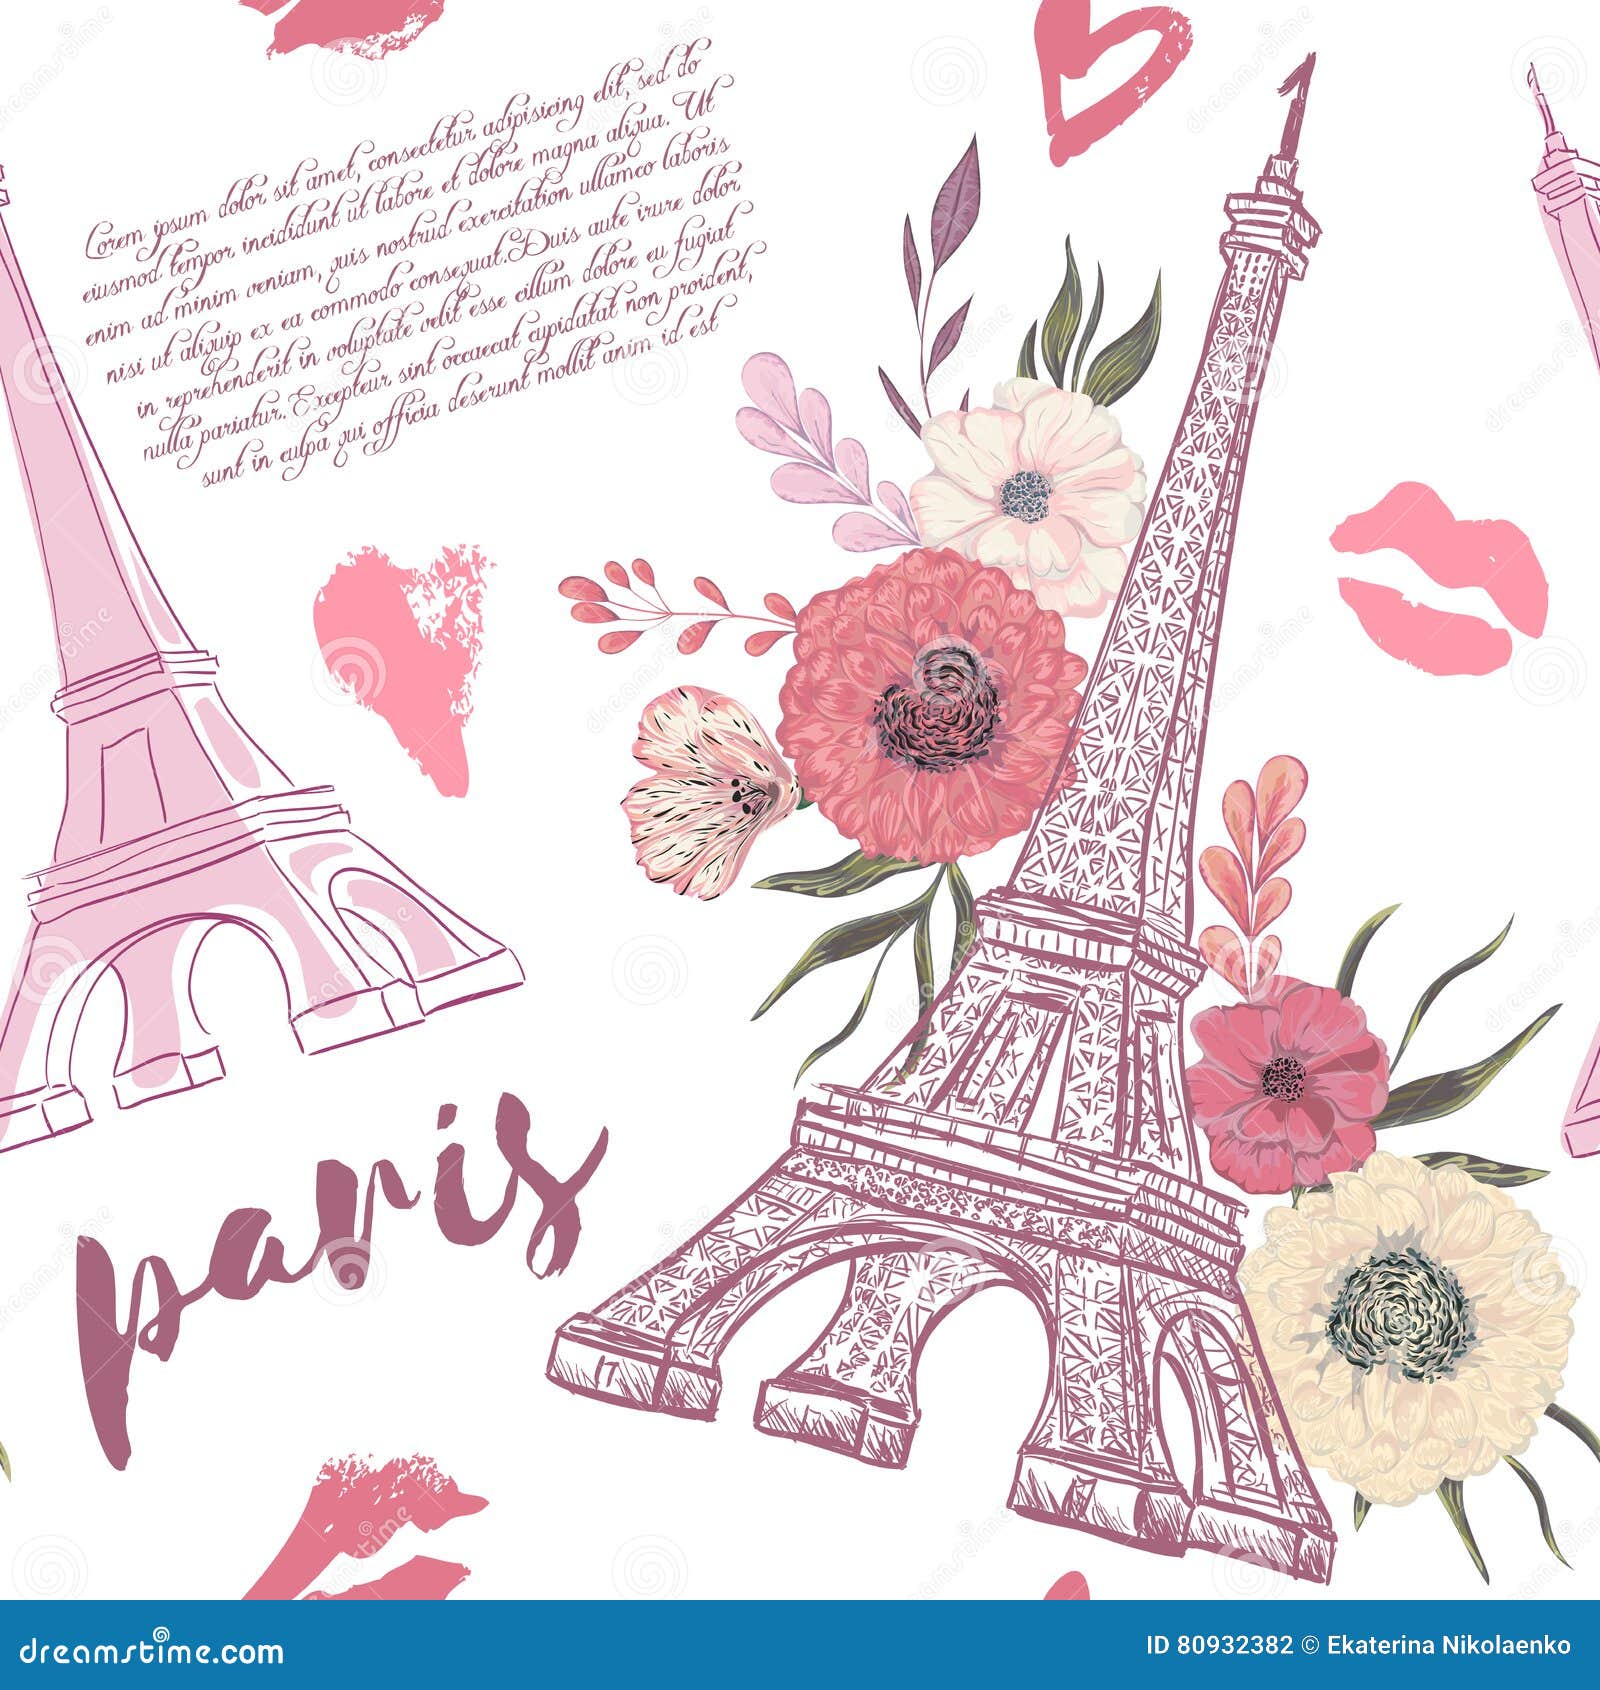 Paris. Vintage seamless pattern with Eiffel Tower, kisses, hearts and floral elements on white background. Retro hand drawn vector illustration in watercolor style.